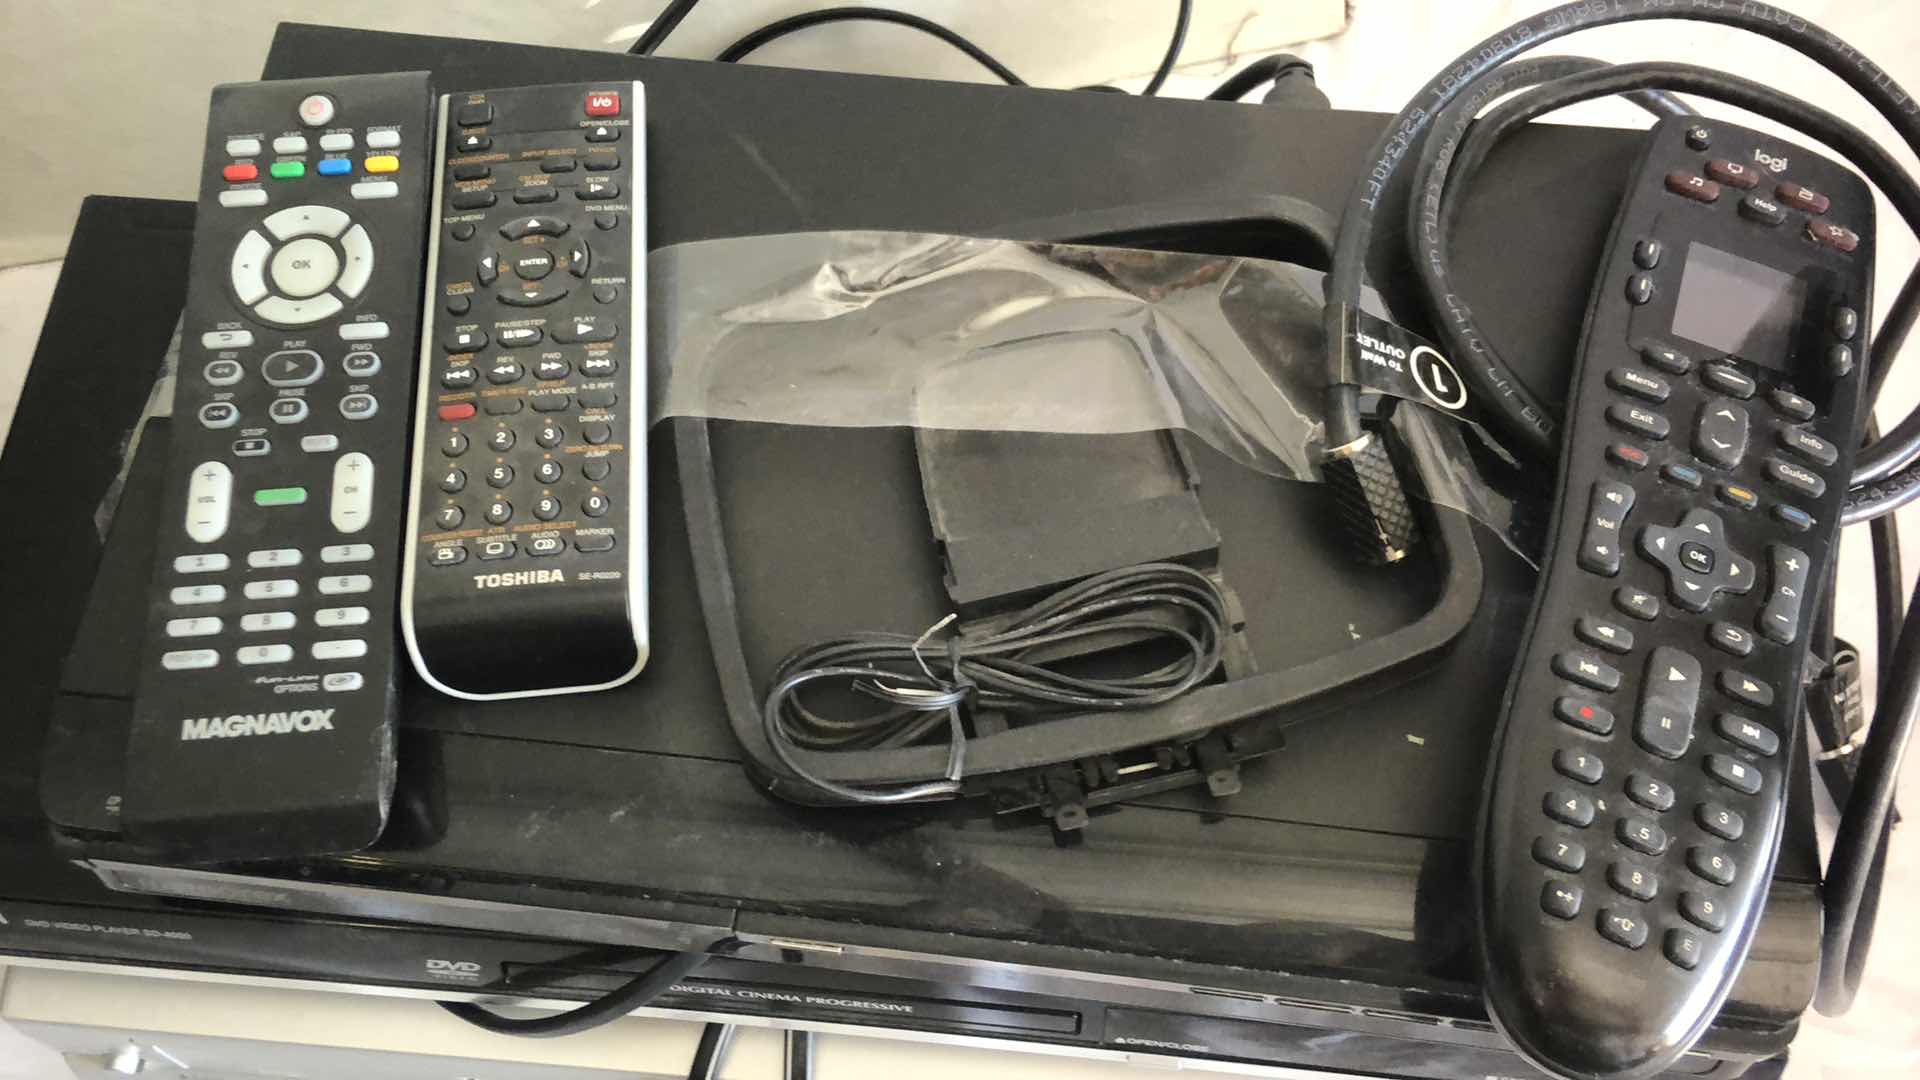 Photo 6 of ENTERTAINMENT BUNDLE RCA RS-255KM AUDIO SYSTEM, DVD AND VHS PLAYERS W REMOTES, STAR TREK VHS SETS